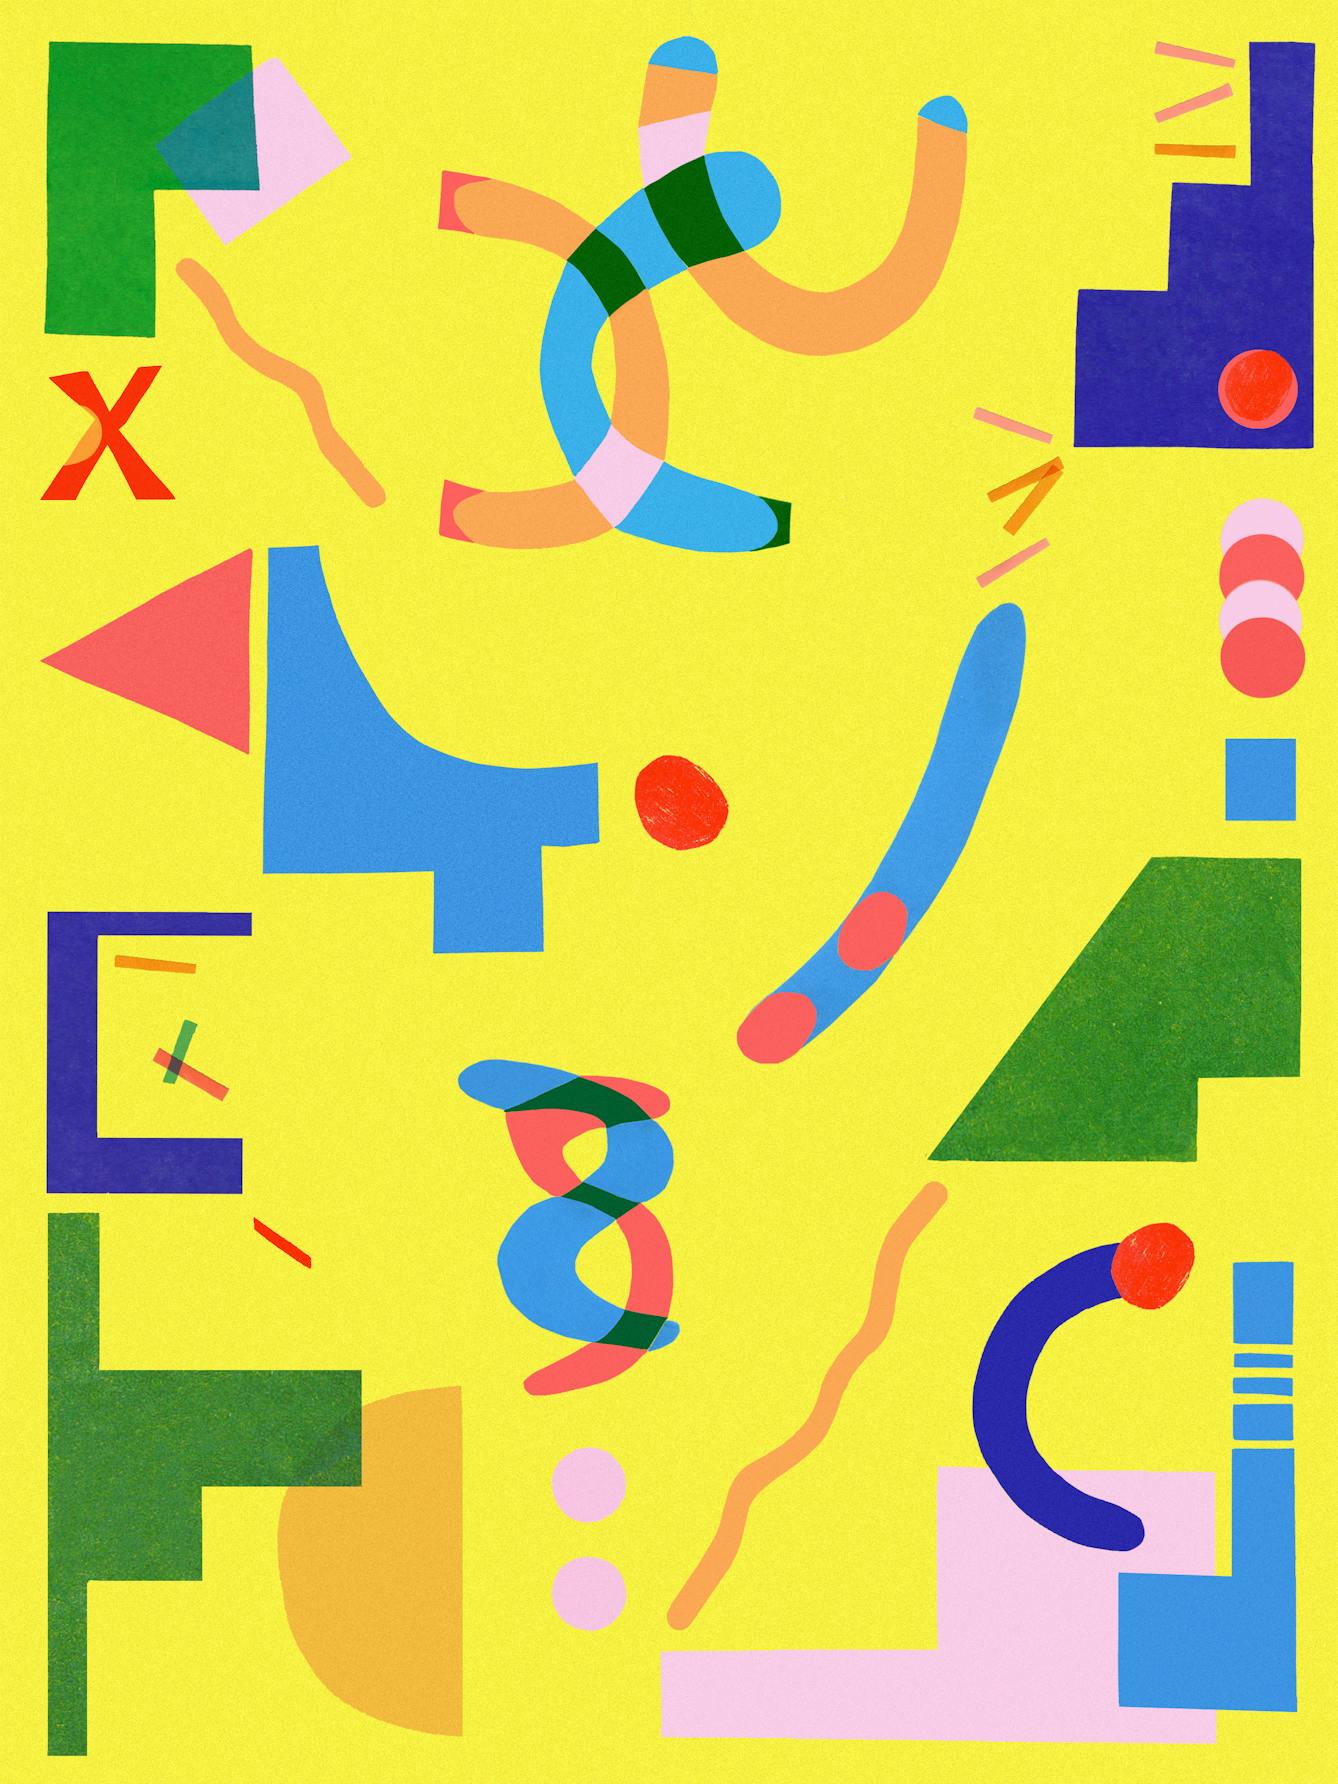 Abstract colourful artwork. The artwork has a yellow background with abstract letters and shapes scattered across it. The shapes and letters are in a variety of bright colours: orange, pink, blue and green. The shapes and letters intersect and blur into one another. Several of the shapes are stacked on top of other shapes. 